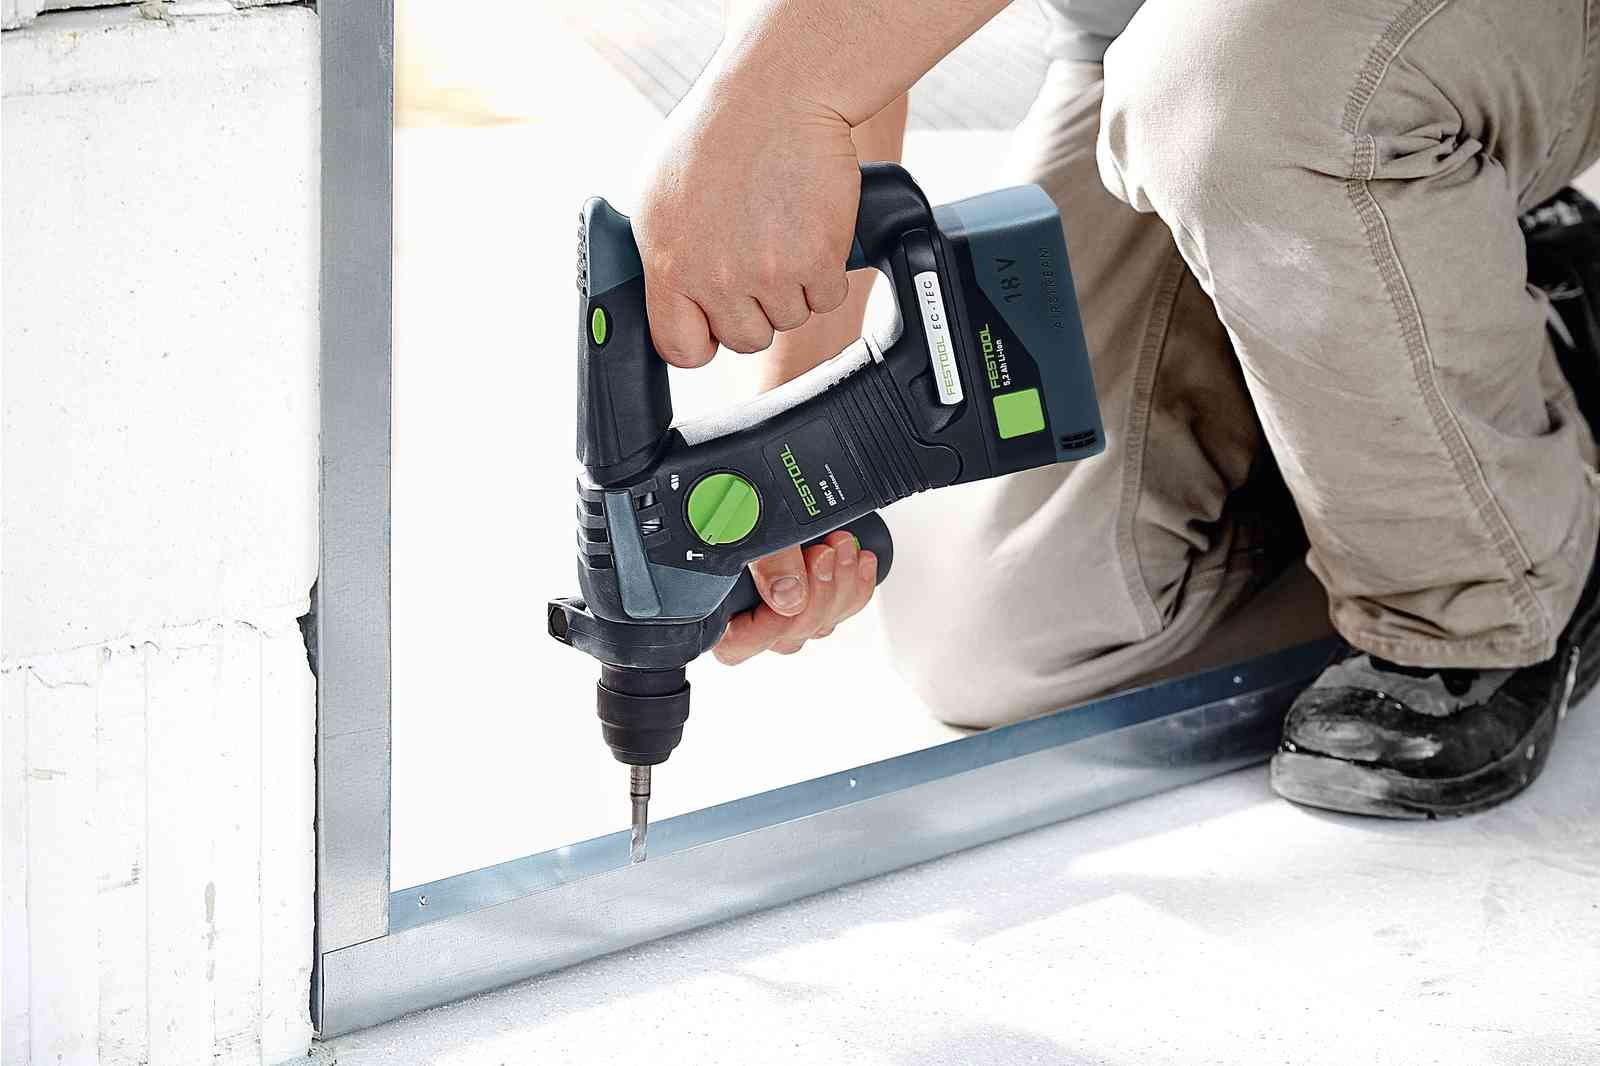 BHC 18V Cordless Rotary Hammer Basic in Systainer 577600 by Festool